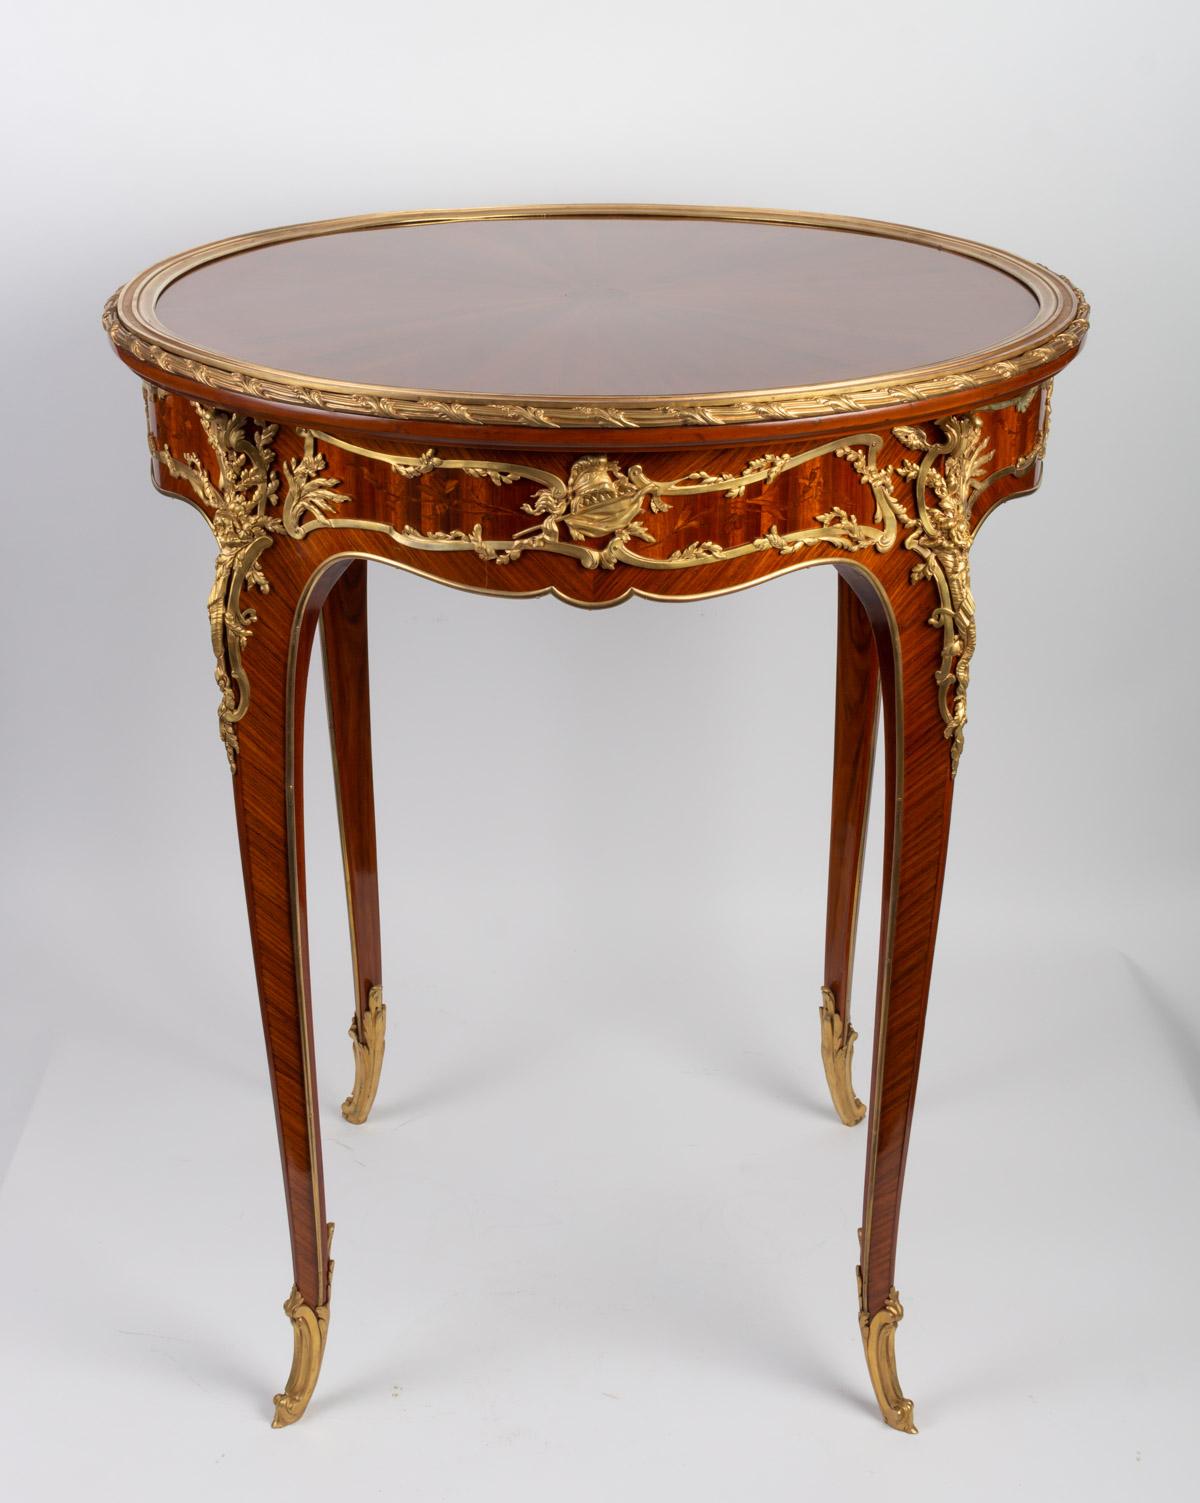 European Pedestal Table in Marquetry and Gilt Bronze